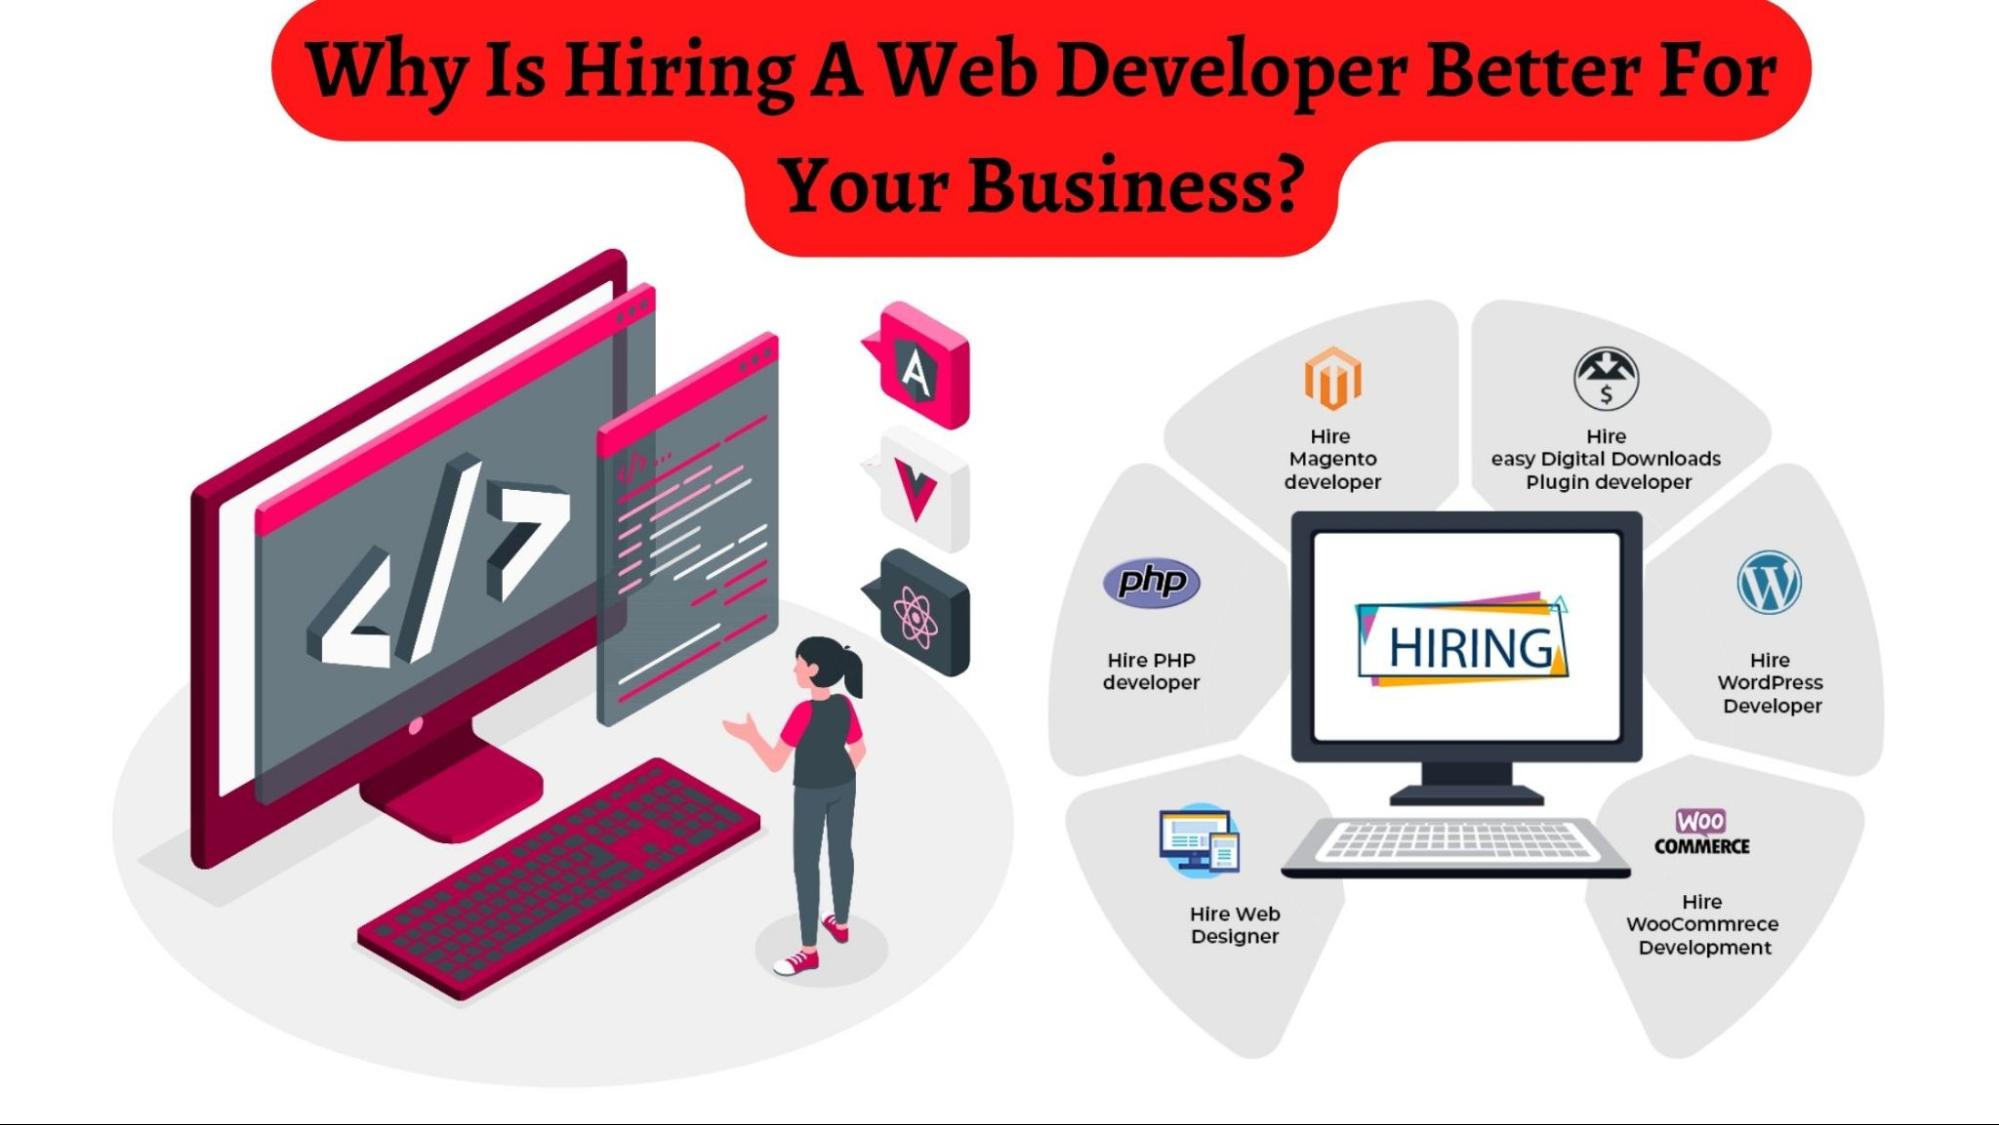 Why Is Hiring A Web Developer Better For Your Business?